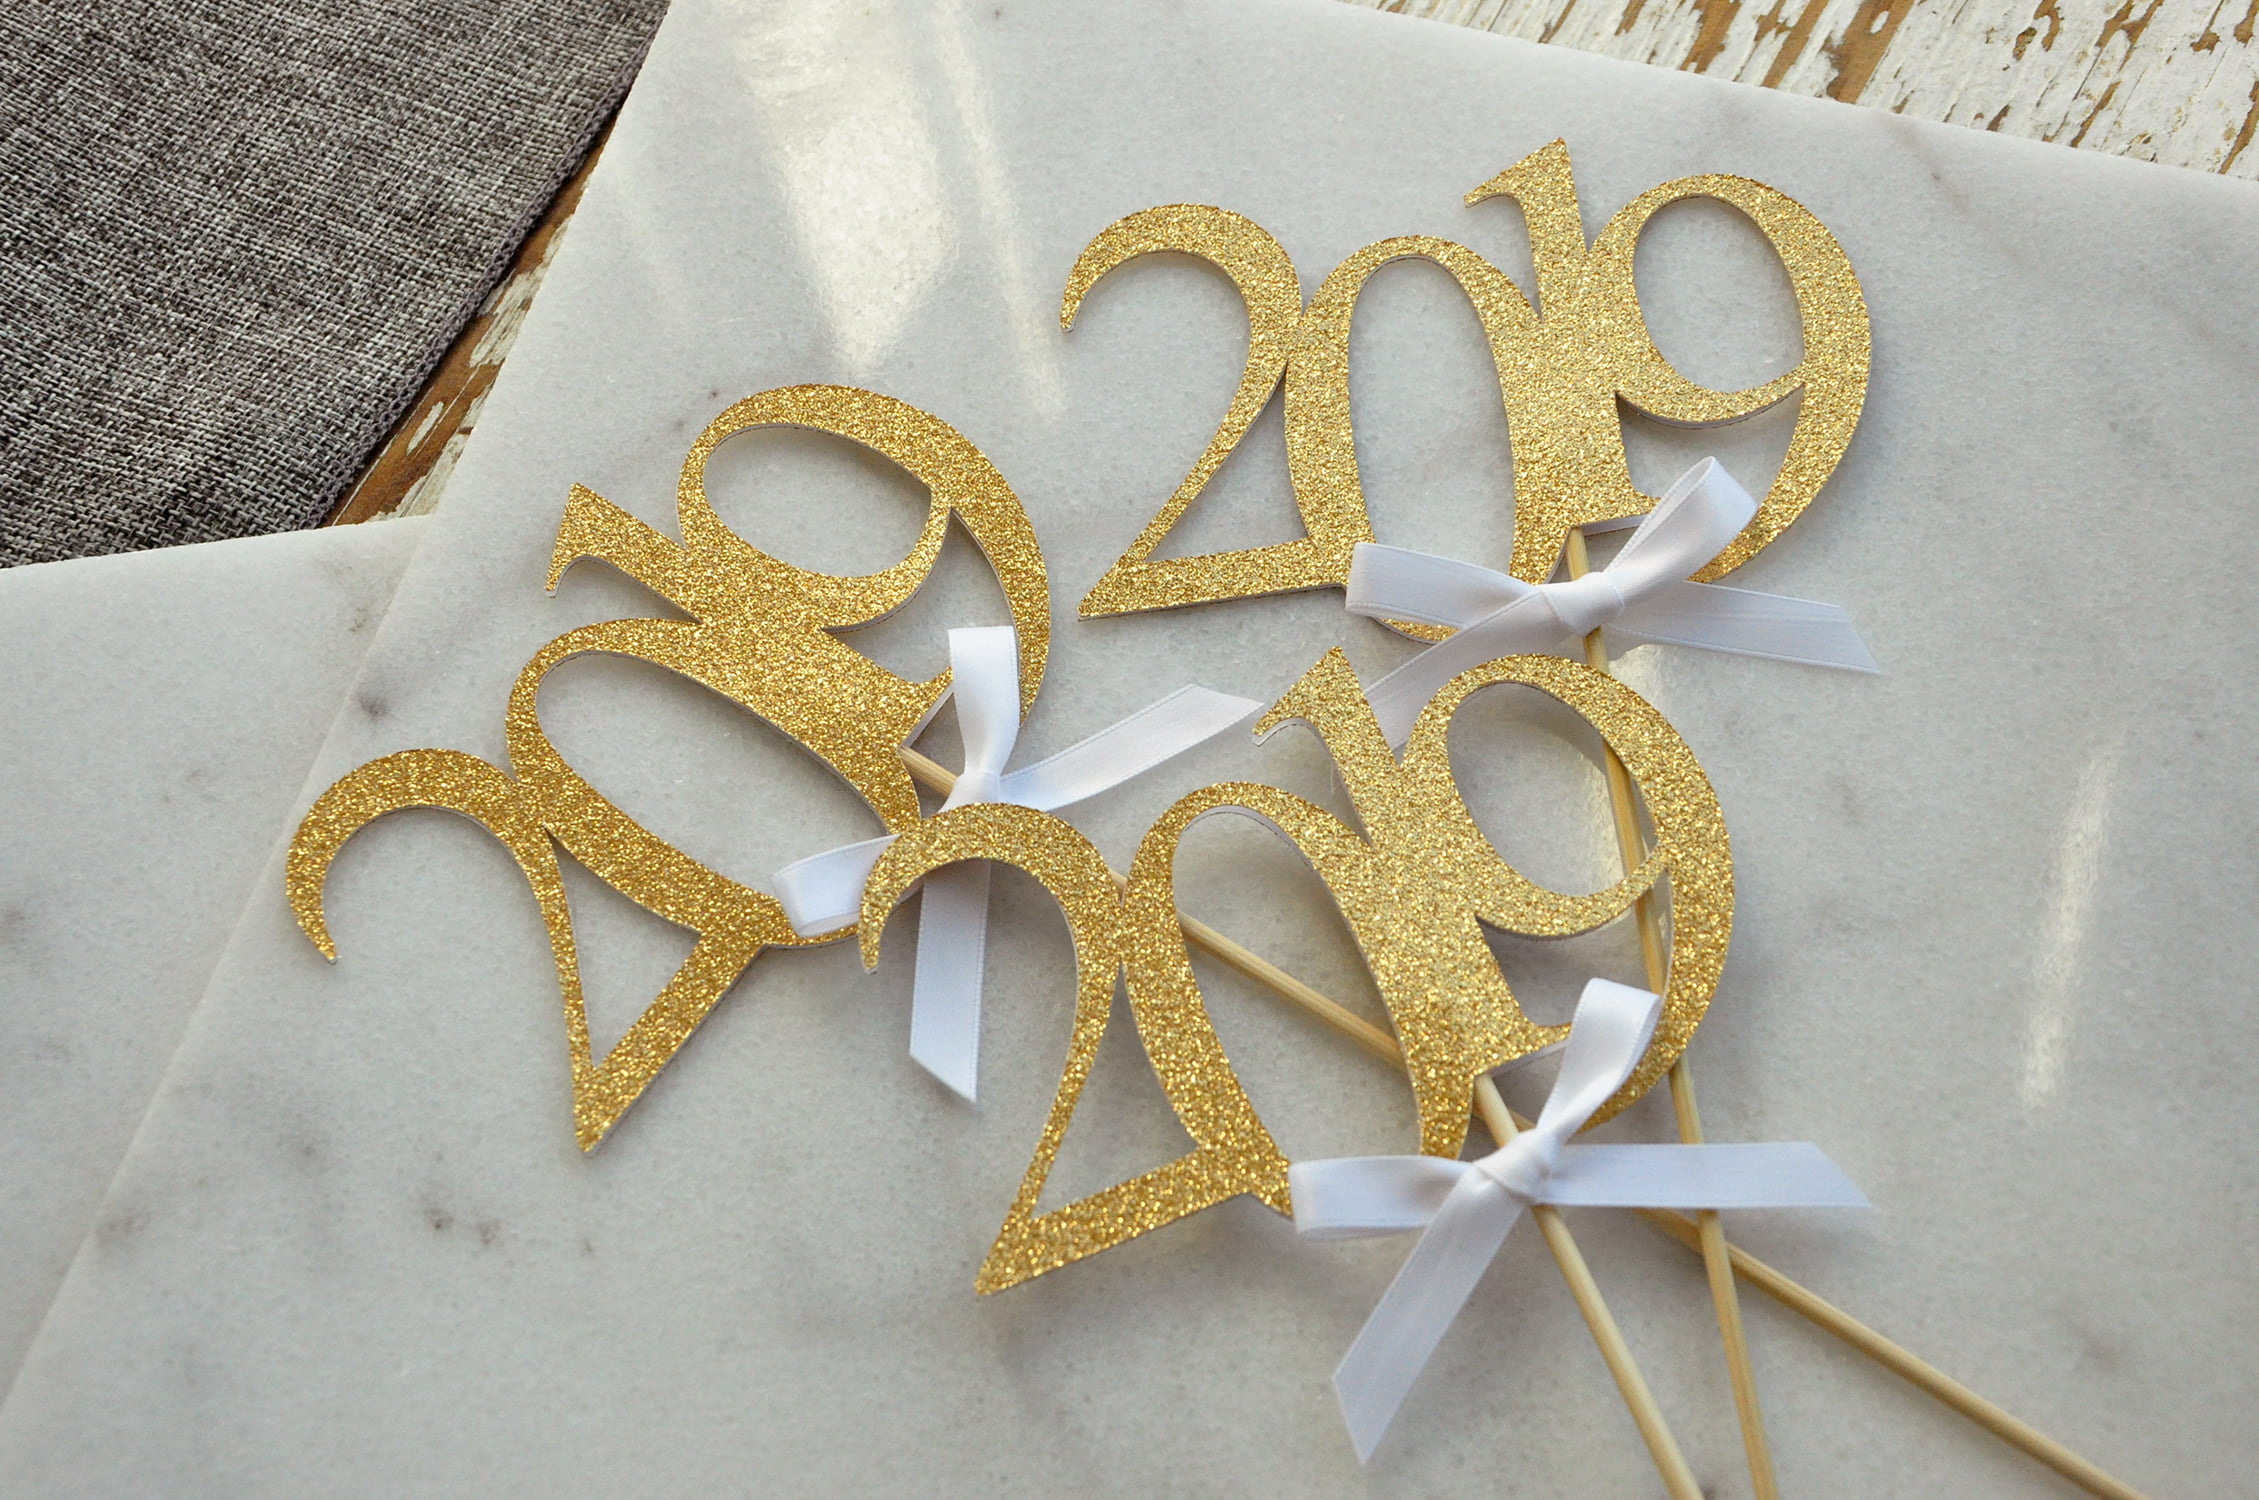 3 Single - 2019 Wands Graduation Centerpiece 2019 Wands with White Bows. Silver 2019 Graduation Centerpiece Sticks with Bows. 